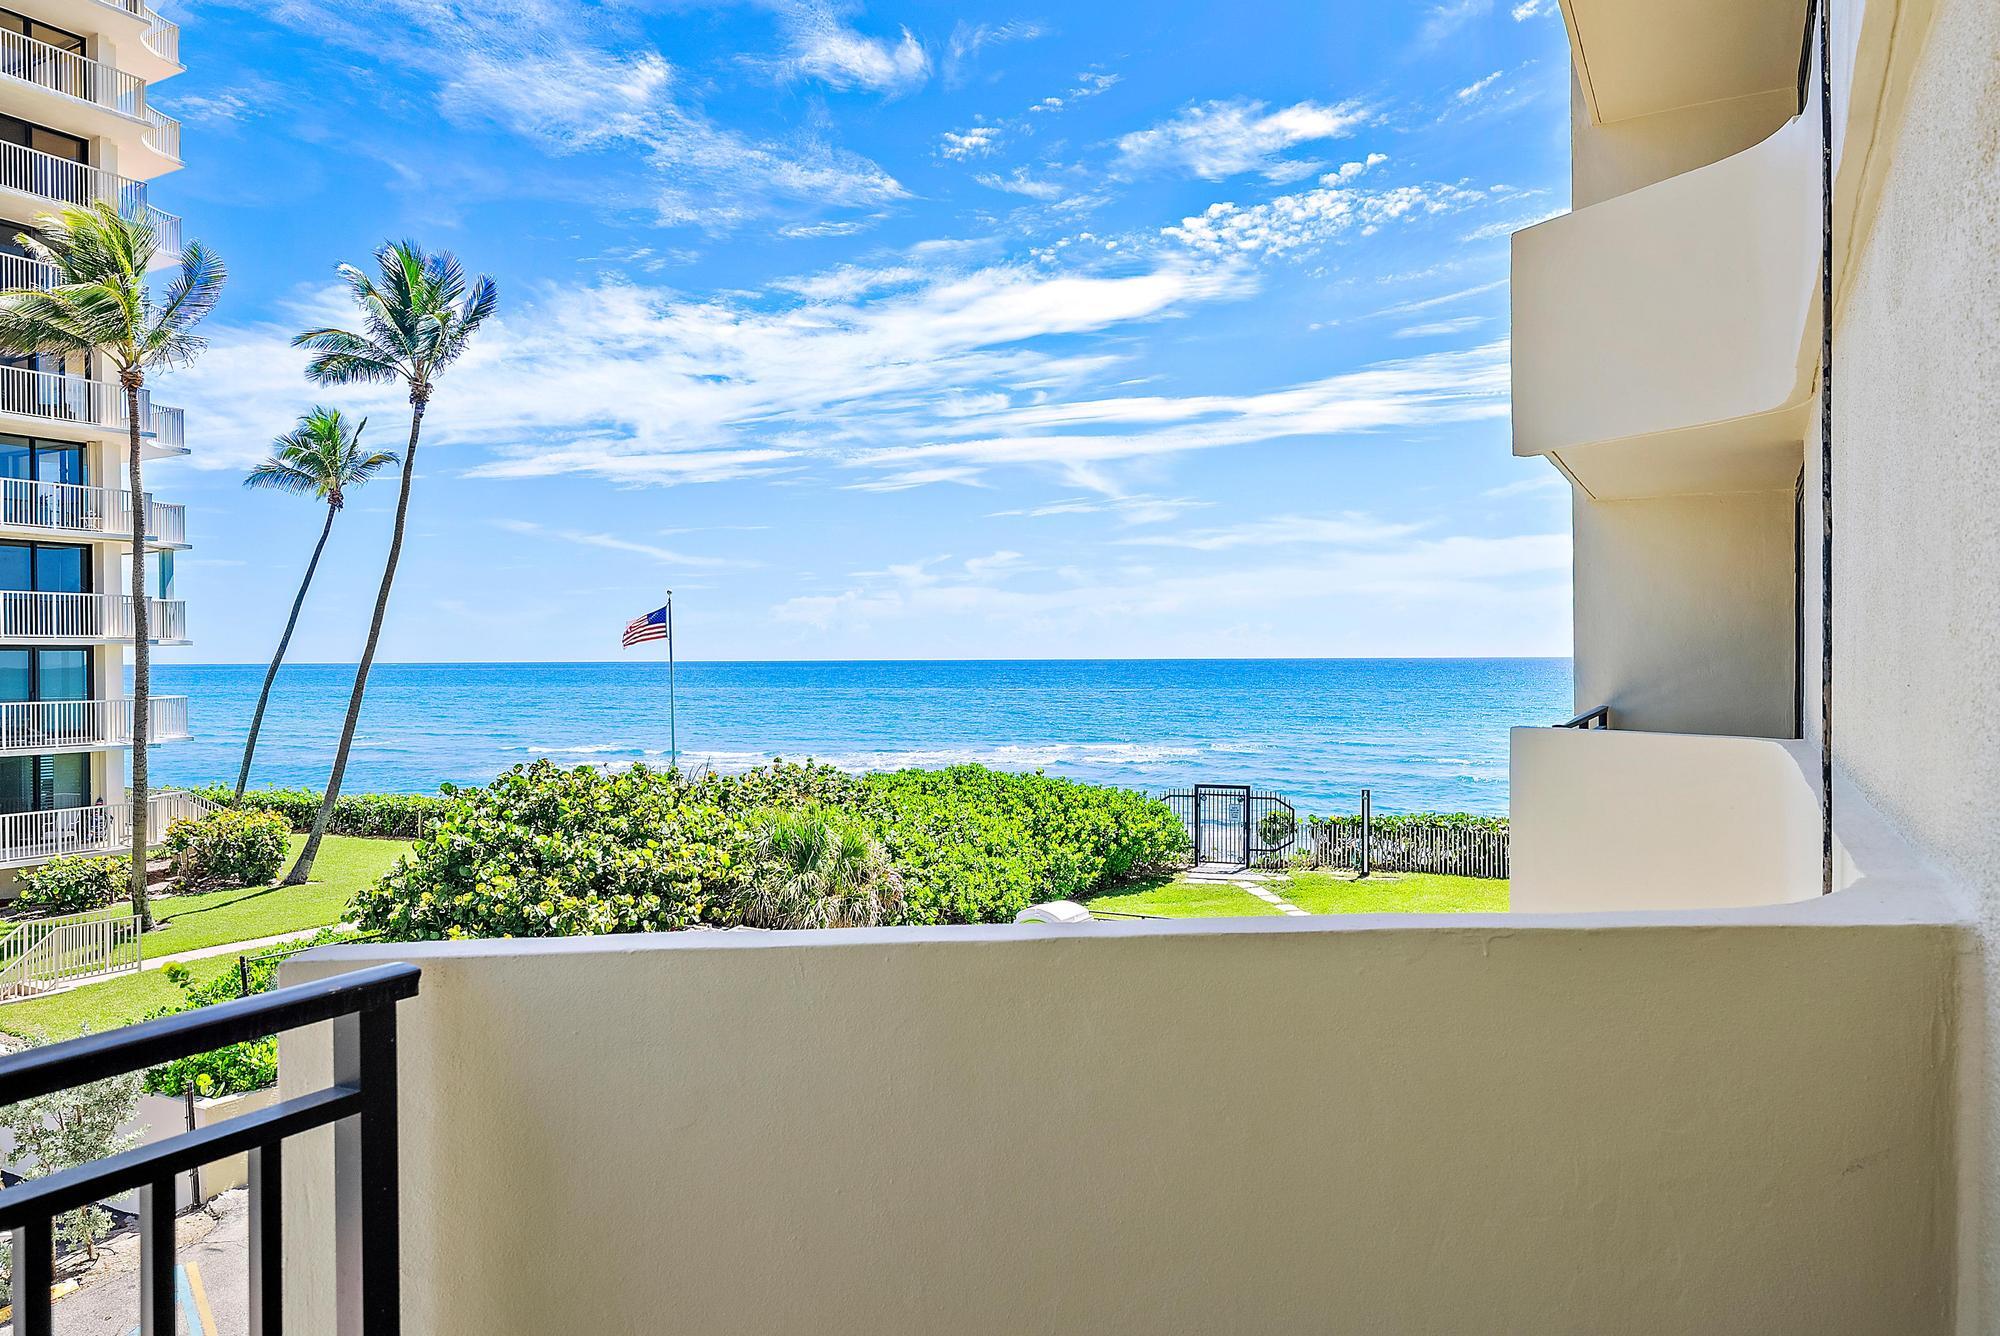 Desirable oceanfront 2 bedroom, 2 bathroom condo in the Seagrape building on Singer Island. Perched on a pristine stretch of coastline, this condo offers breathtaking views of the azure waters of the Atlantic ocean and intracoastal. Floor-to-ceiling windows and spacious balconies provide uninterrupted vistas, allowing you to witness stunning sunrises and sunsets over the horizon.Step inside the lobby to discover a meticulously redesigned space where modern elegance meets coastal charm with its soothing tones of blues and natural wood & stone finishes.  The condo boasts an open floor plan that maximizes natural light and enhances the feeling of spaciousness. The layout emphasizes functionality, offering a comfortable living environment ideal for relaxation and entertainment. Seagrape offers an array of amenities designed for comfort and leisure. These include a resort-style heated pool and spa, a clubhouse with a kitchen for social gatherings, outdoor grilling areas, recreational options such as tennis and shuffleboard. Residents enjoy private beach access, ensuring a serene and exclusive coastal experience.
The sixteen-story building has undergone elegant renovations, enhancing the exterior entrance, lobby, hallways, and elevators. The condo offers, cable, internet, additional storage space, and an assigned covered parking spot for added convenience and security. An onsite property manager ensures convenience and efficient management.
This condo presents a rare opportunity to own a private retreat on the ocean, where every day begins and ends with priceless views of the sea. Whether you're seeking a permanent residence, a vacation getaway, or an investment property, this Singer Island condo combines luxurious living with the allure of beachfront tranquility.
This ocean front condo on Singer Island is not just a place to live; it's a lifestyle choice that blends comfort, convenience, and natural beauty in one of Florida's most sought-after coastal communities.